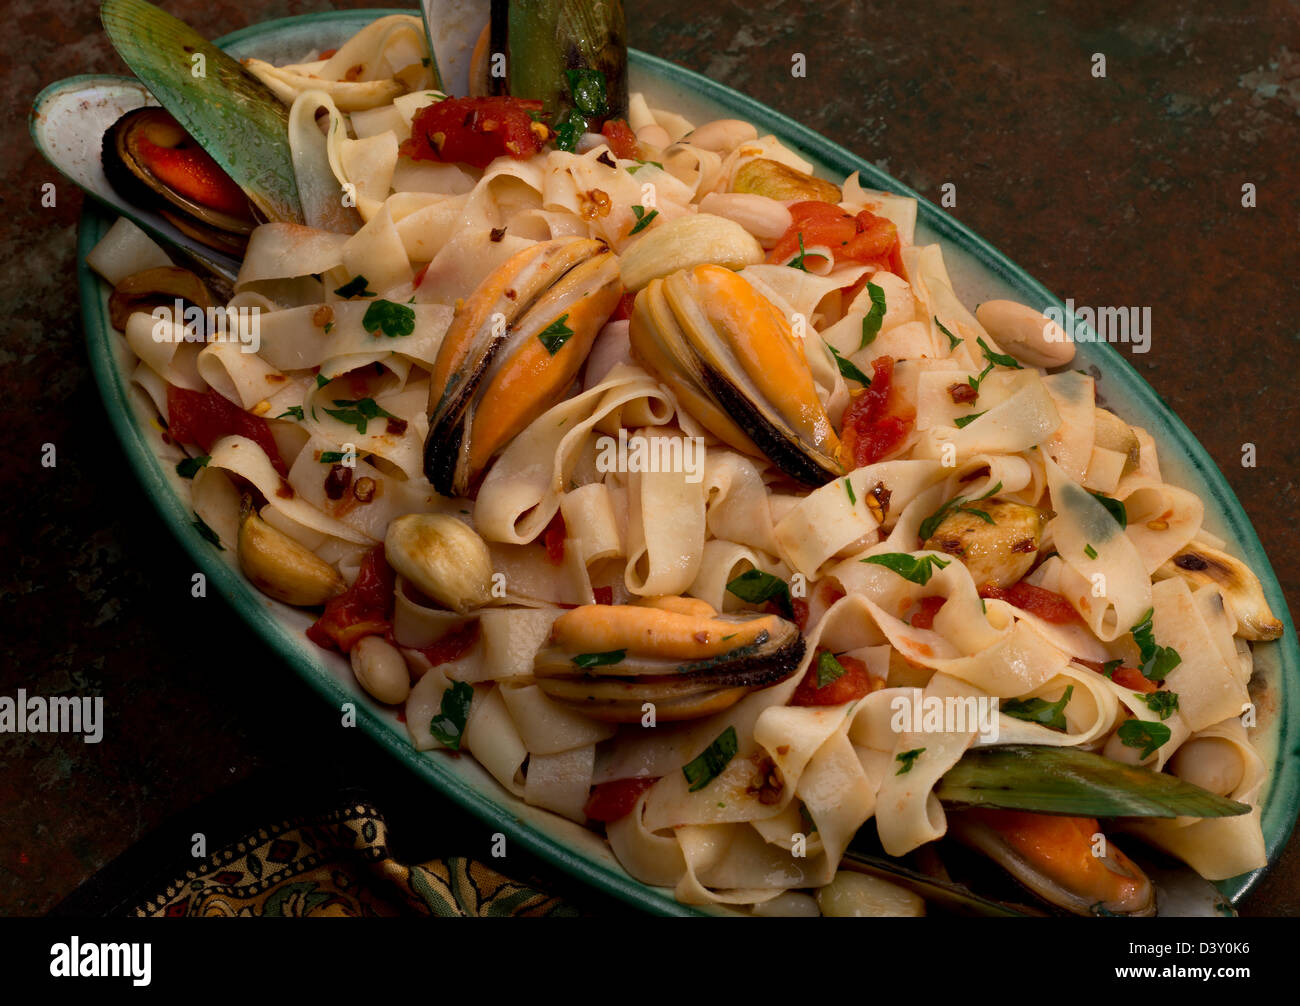 A tagliatelle pasta platter with green mussels, garlic, cannelini beans and parsley. Stock Photo